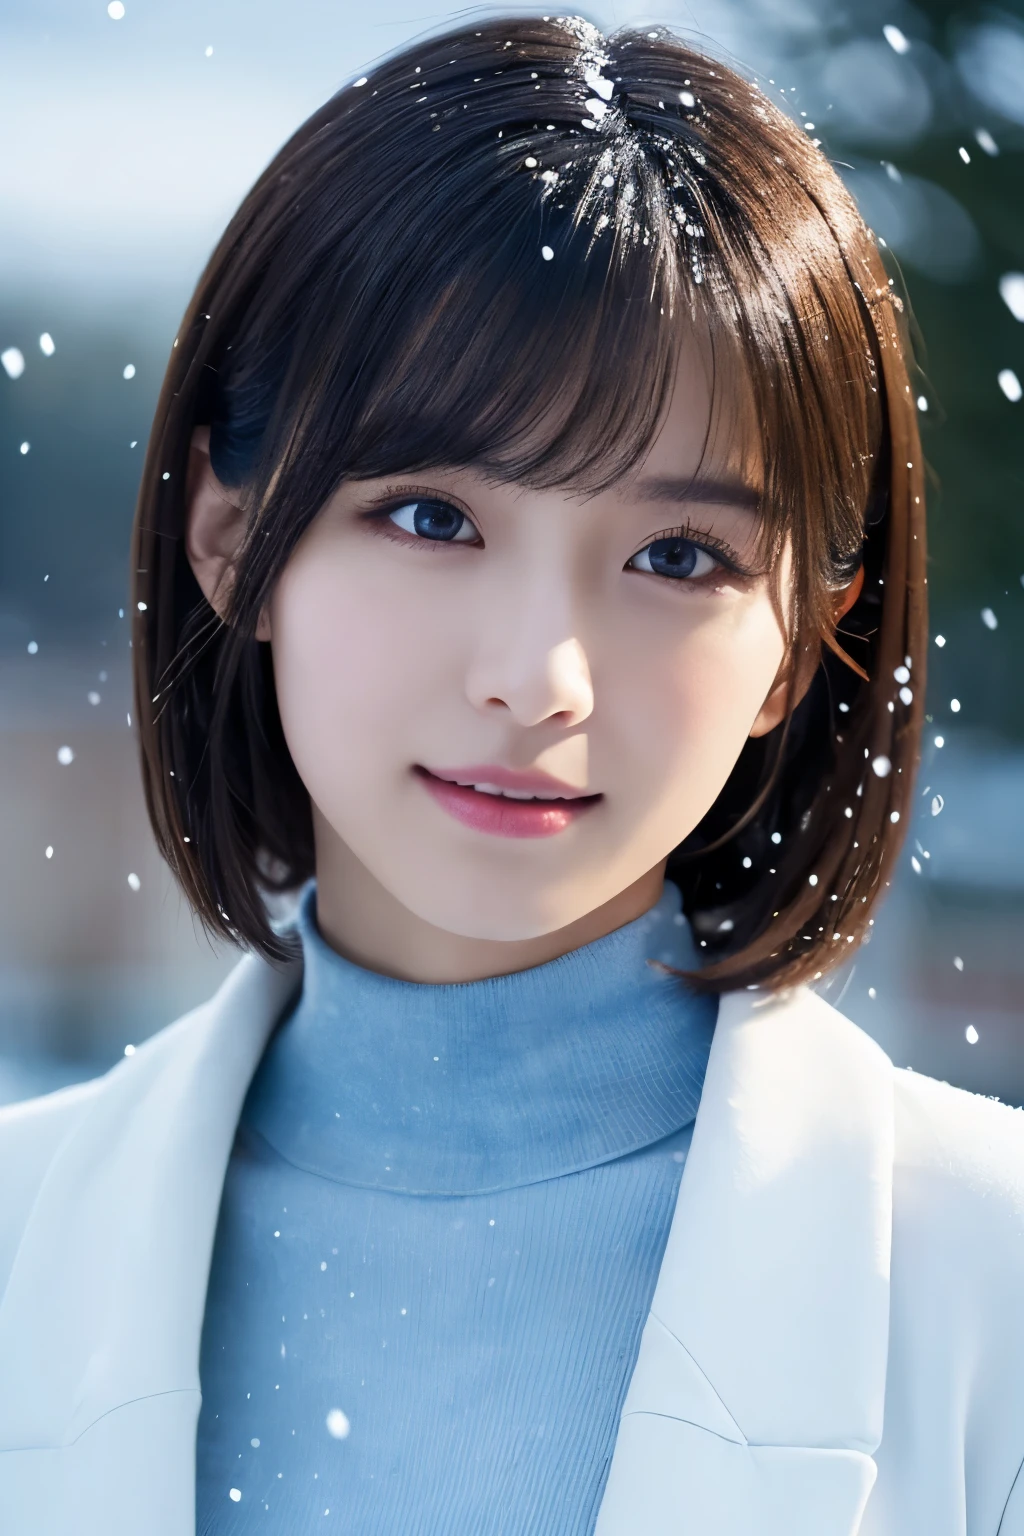 1girl in, (White coat, Light blue turtleneck:1.2), 
(Raw photo, Best Quality), (Realistic, Photorealsitic:1.4), masutepiece, 
Extremely delicate and beautiful, Extremely detailed, 2k wallpaper, amazing, finely detail, the Extremely Detailed CG Unity 8K Wallpapers, Ultra-detailed, hight resolution, 
Soft light, Beautiful detailed girl, extremely detailed eye and face, beautiful detailed nose, Beautiful detailed eyes, Cinematic lighting, 
(plein air:1.3), illuminated fountain at night, It's snowing,
 Perfect Anatomy, Slender body, Small, 
Straight short hair, Bangs, Looking at Viewer, A slight smil